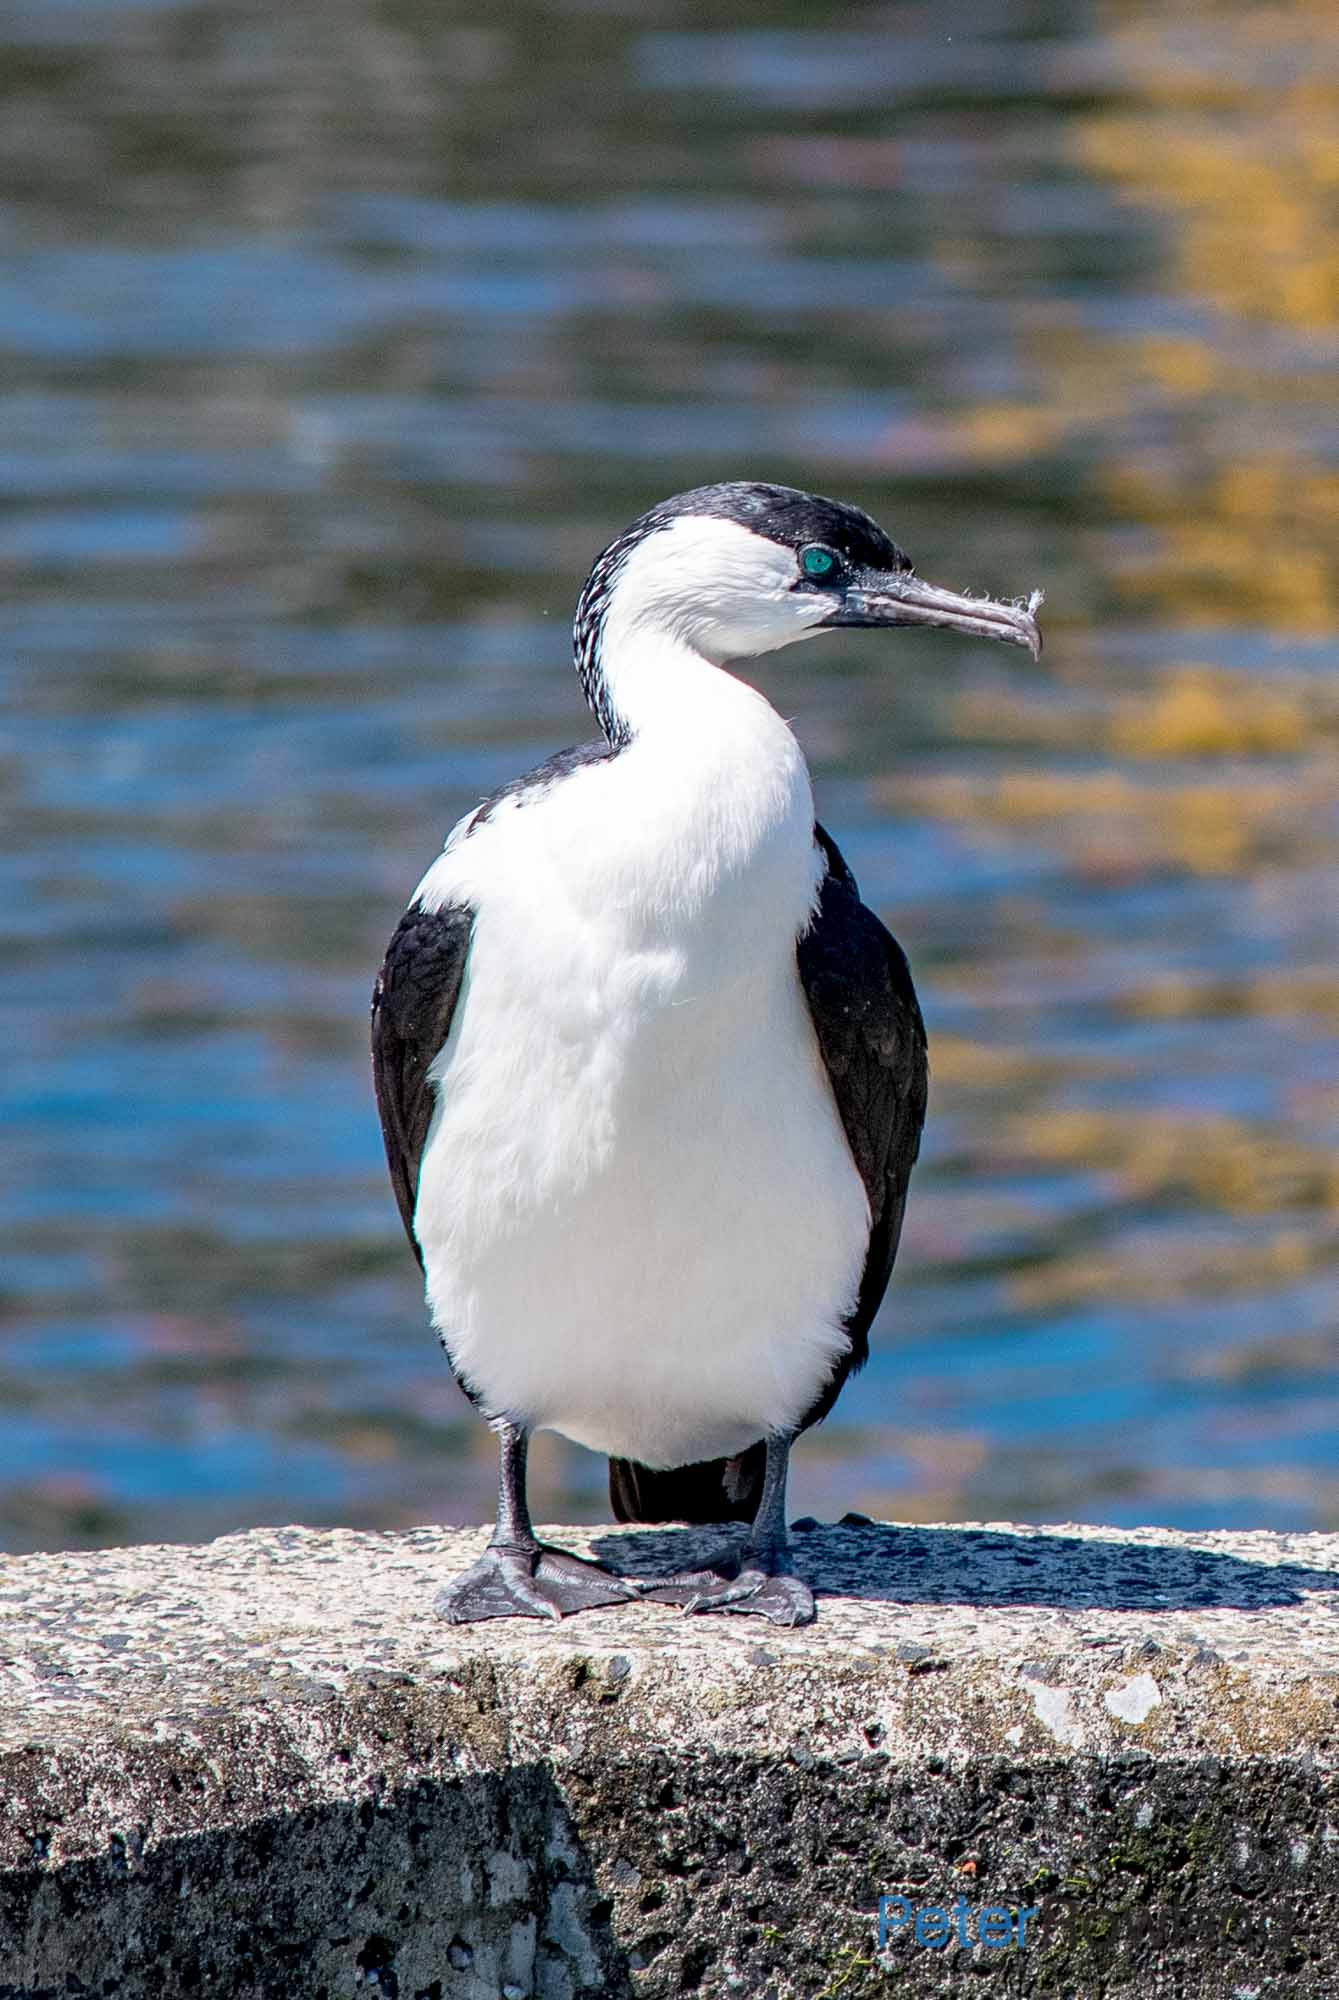 A Black-faced Cormorant sitting on a harbour wall